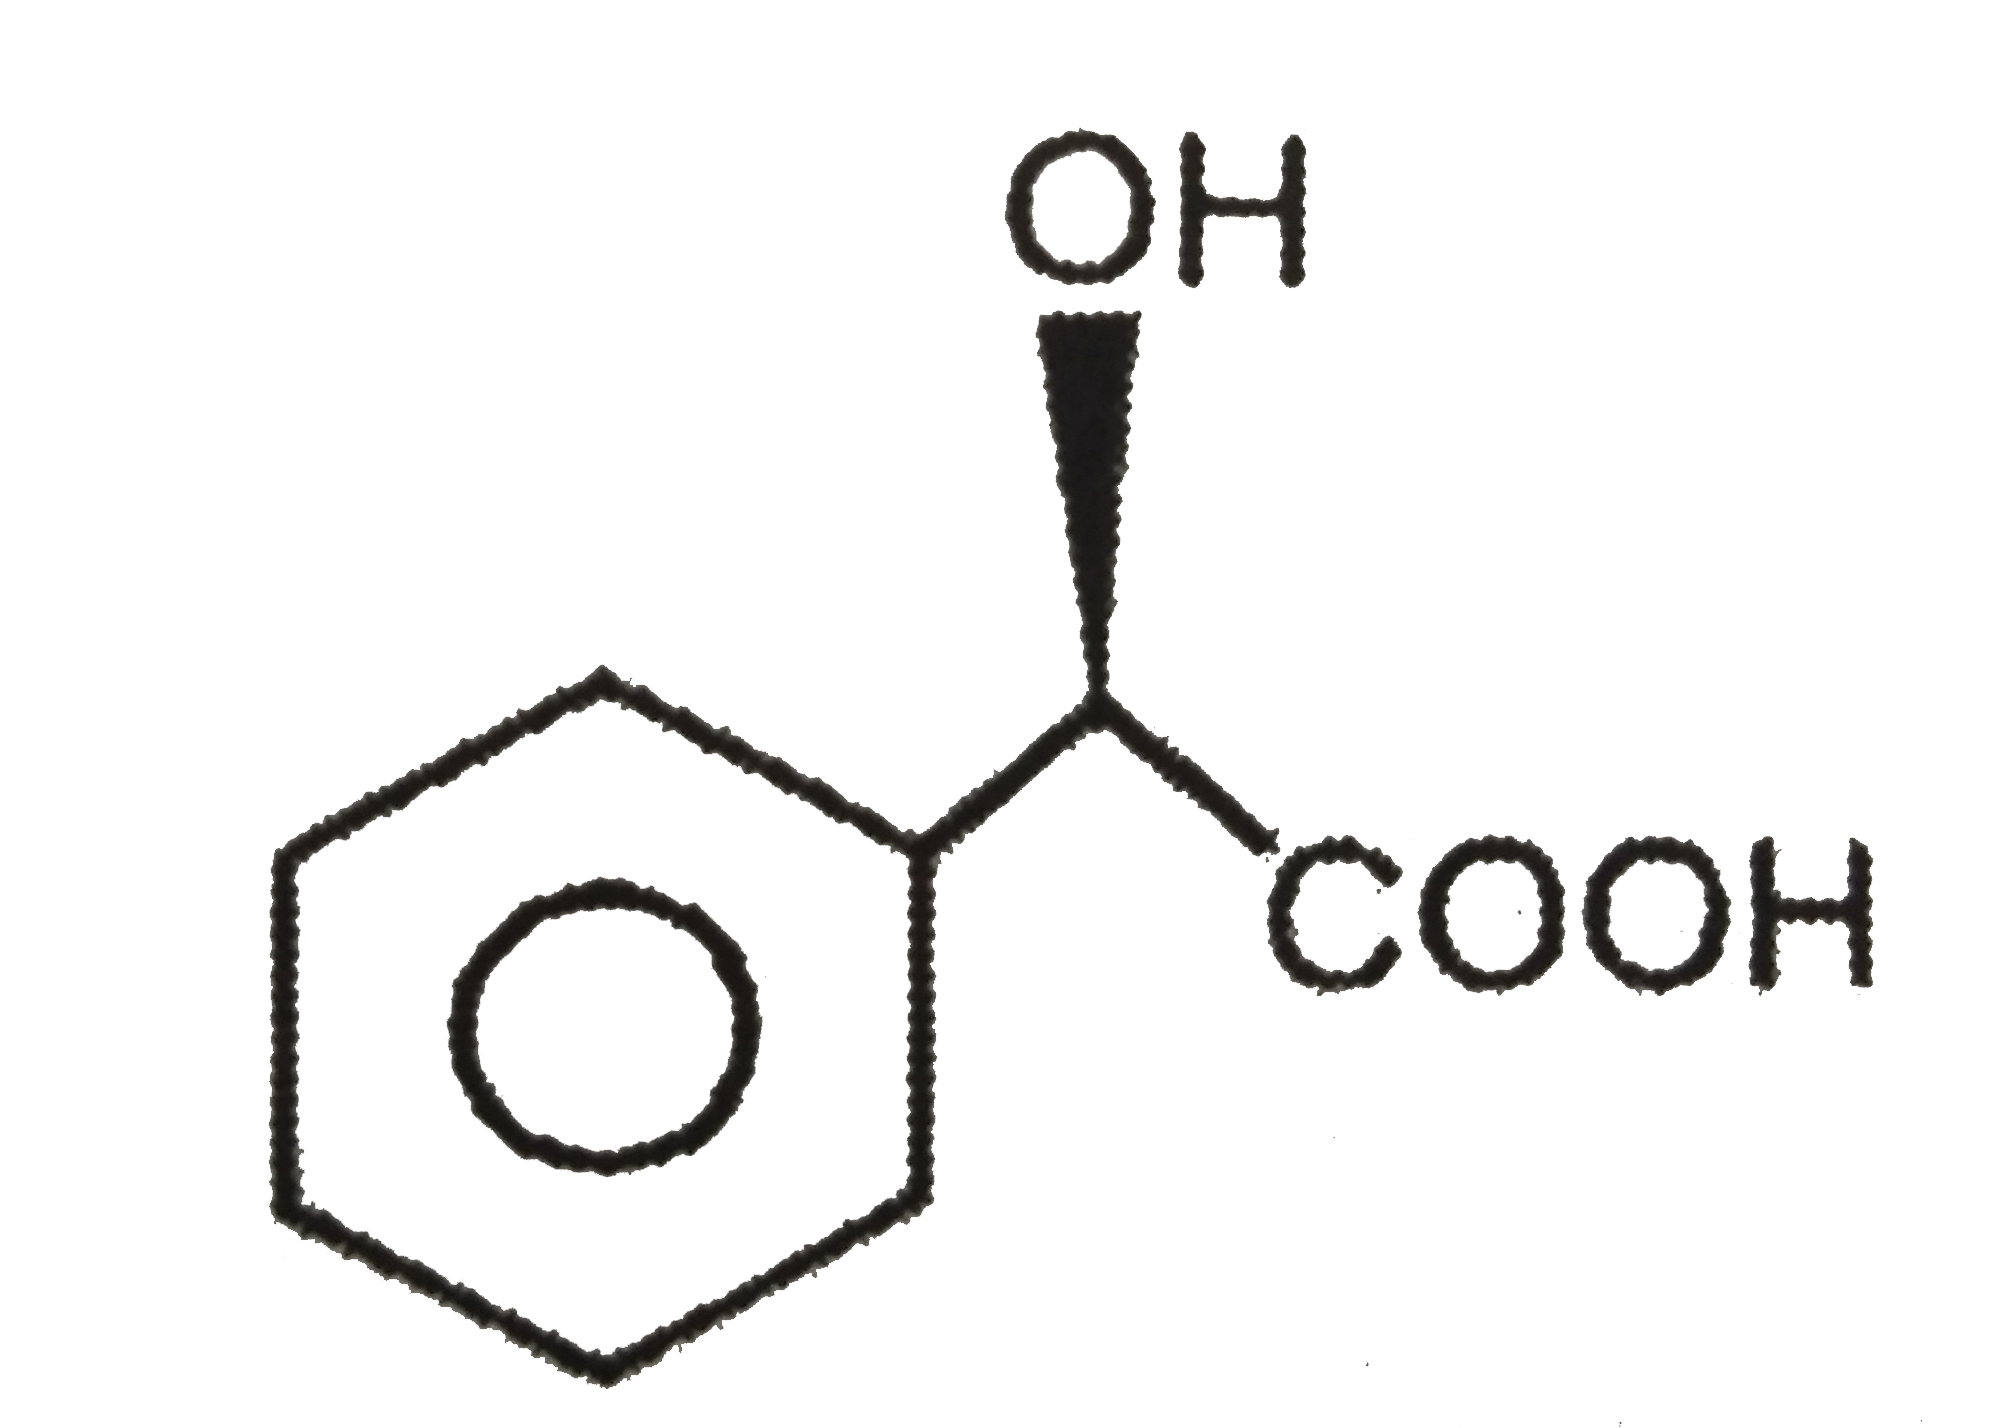 Pure (R) Mandelic acid  has specific rotation of 150. If  a sample contains 60% of the R and 40% of its enantiomer, the [alpha] of his solution is.